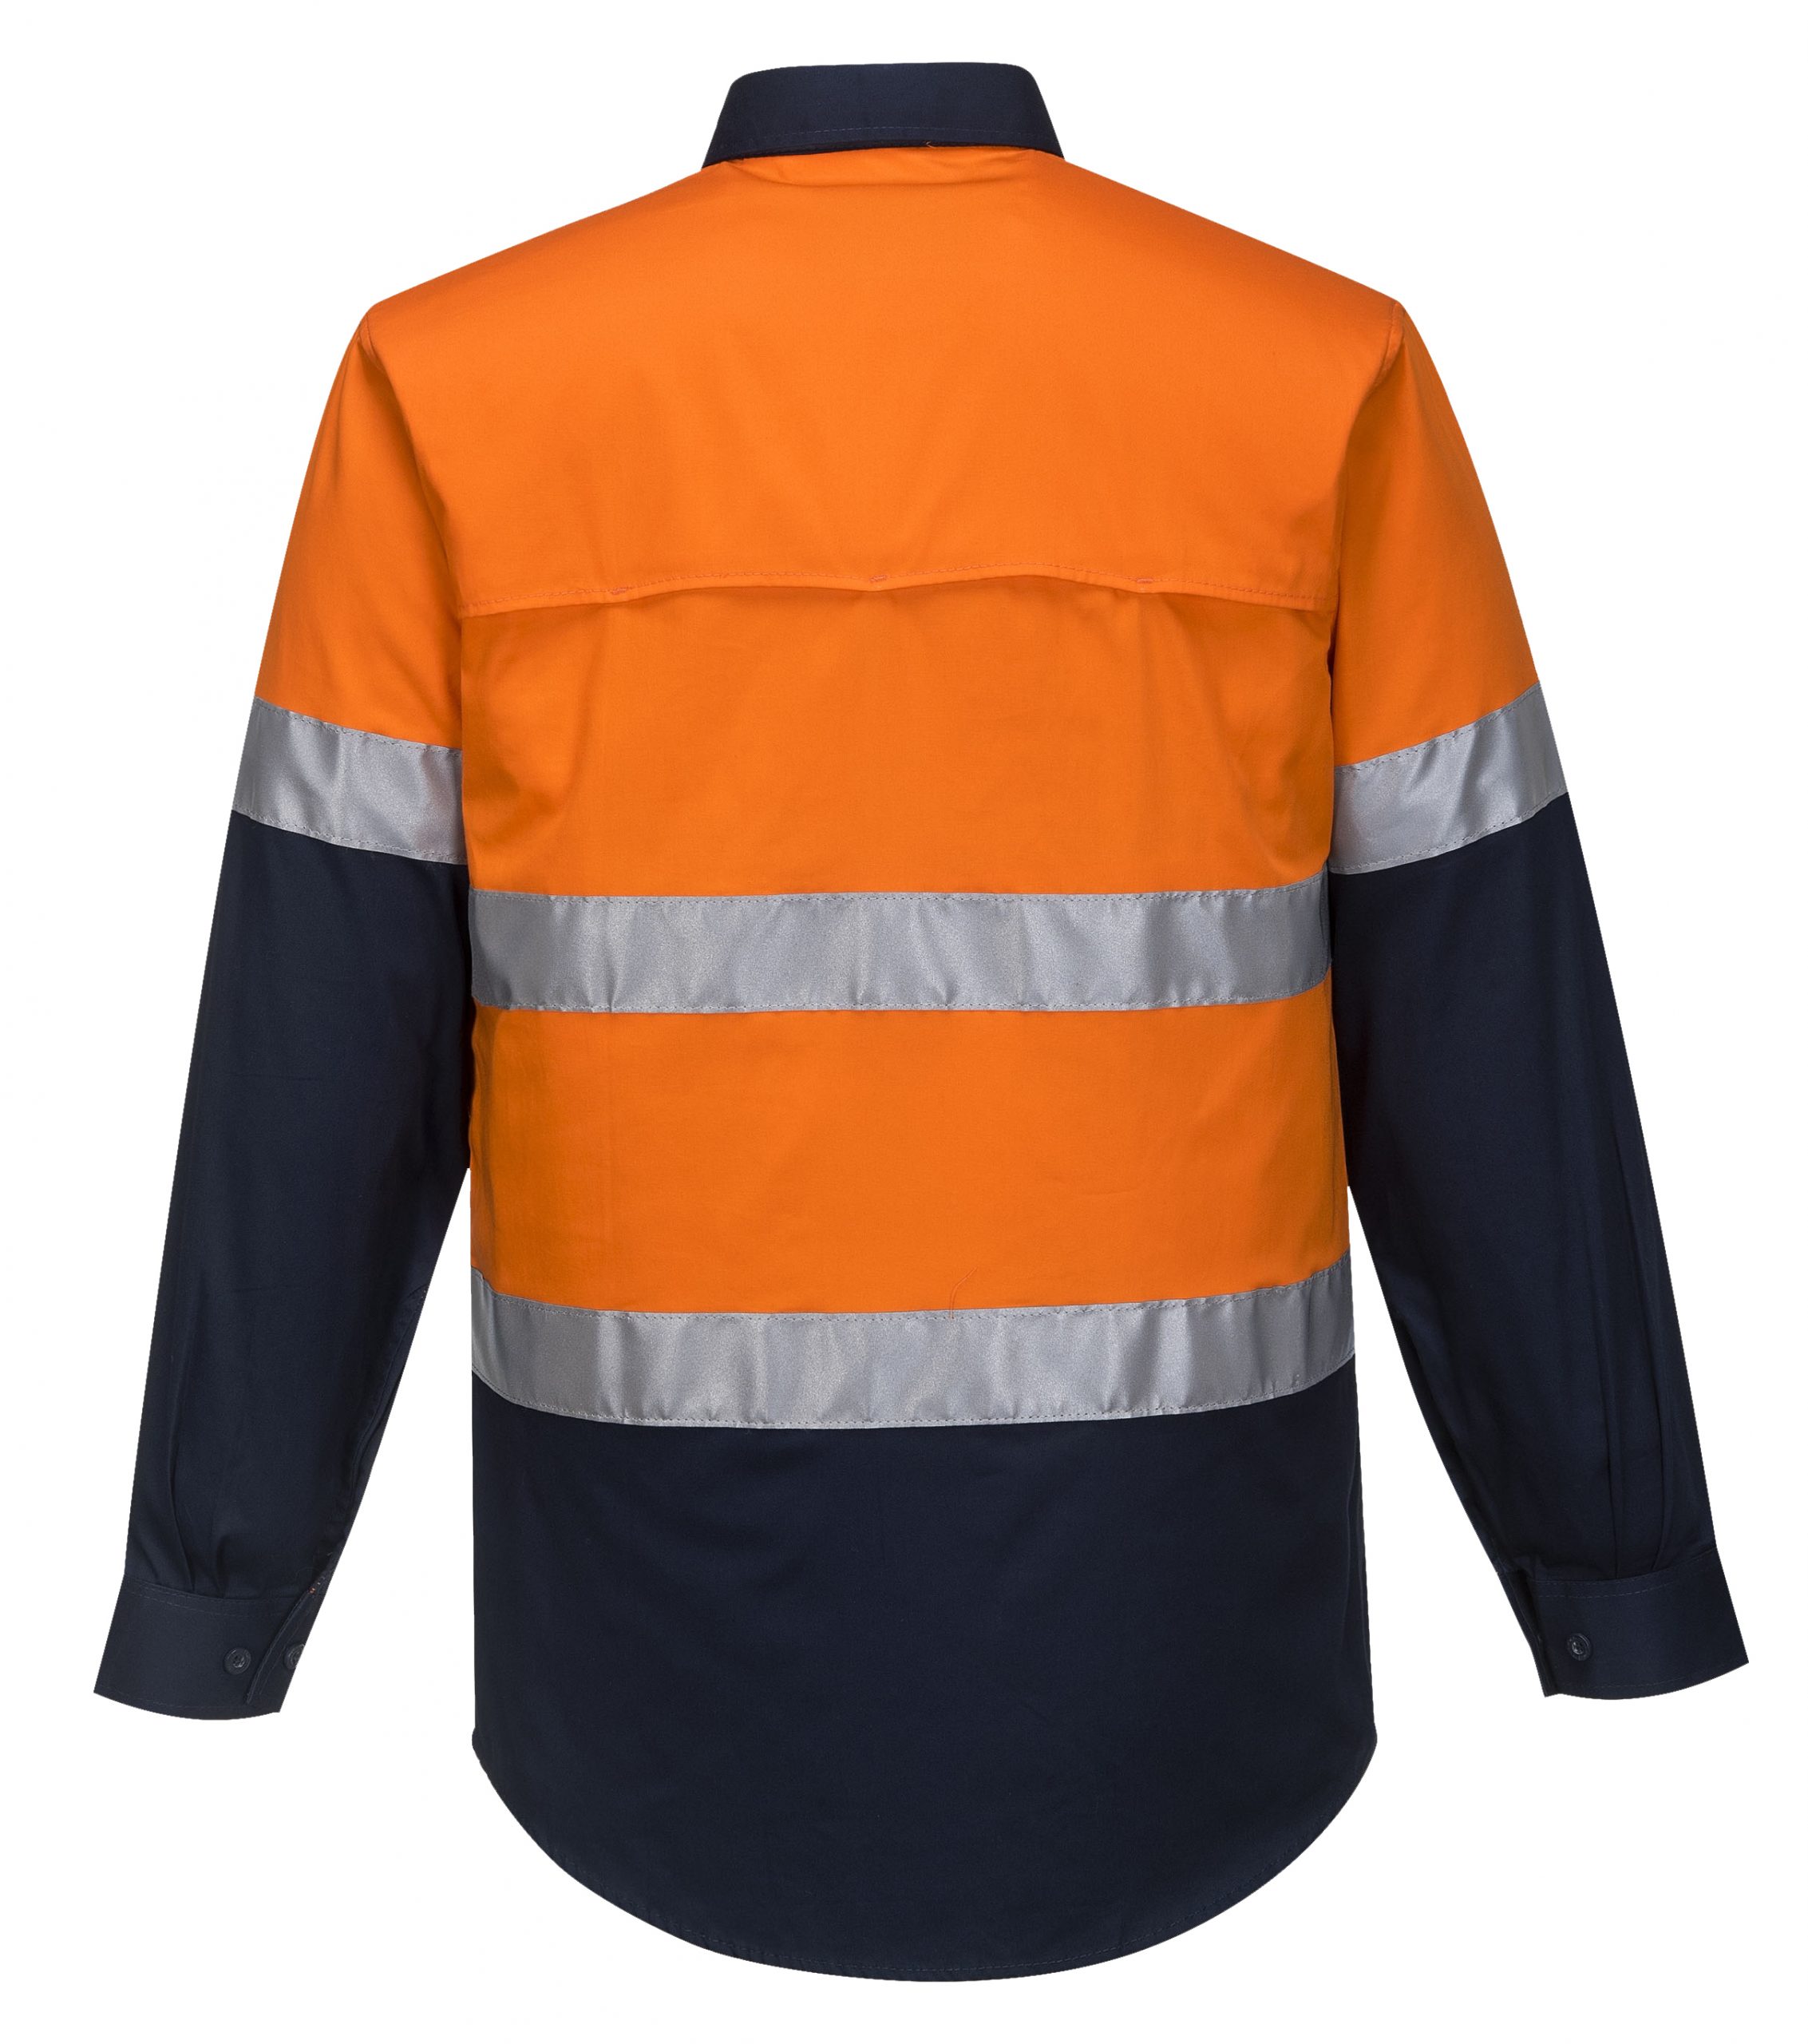 MA801 - Hi-Vis Two Tone Cotton Lightweight Long Sleeve Shirt with Tape ORG2